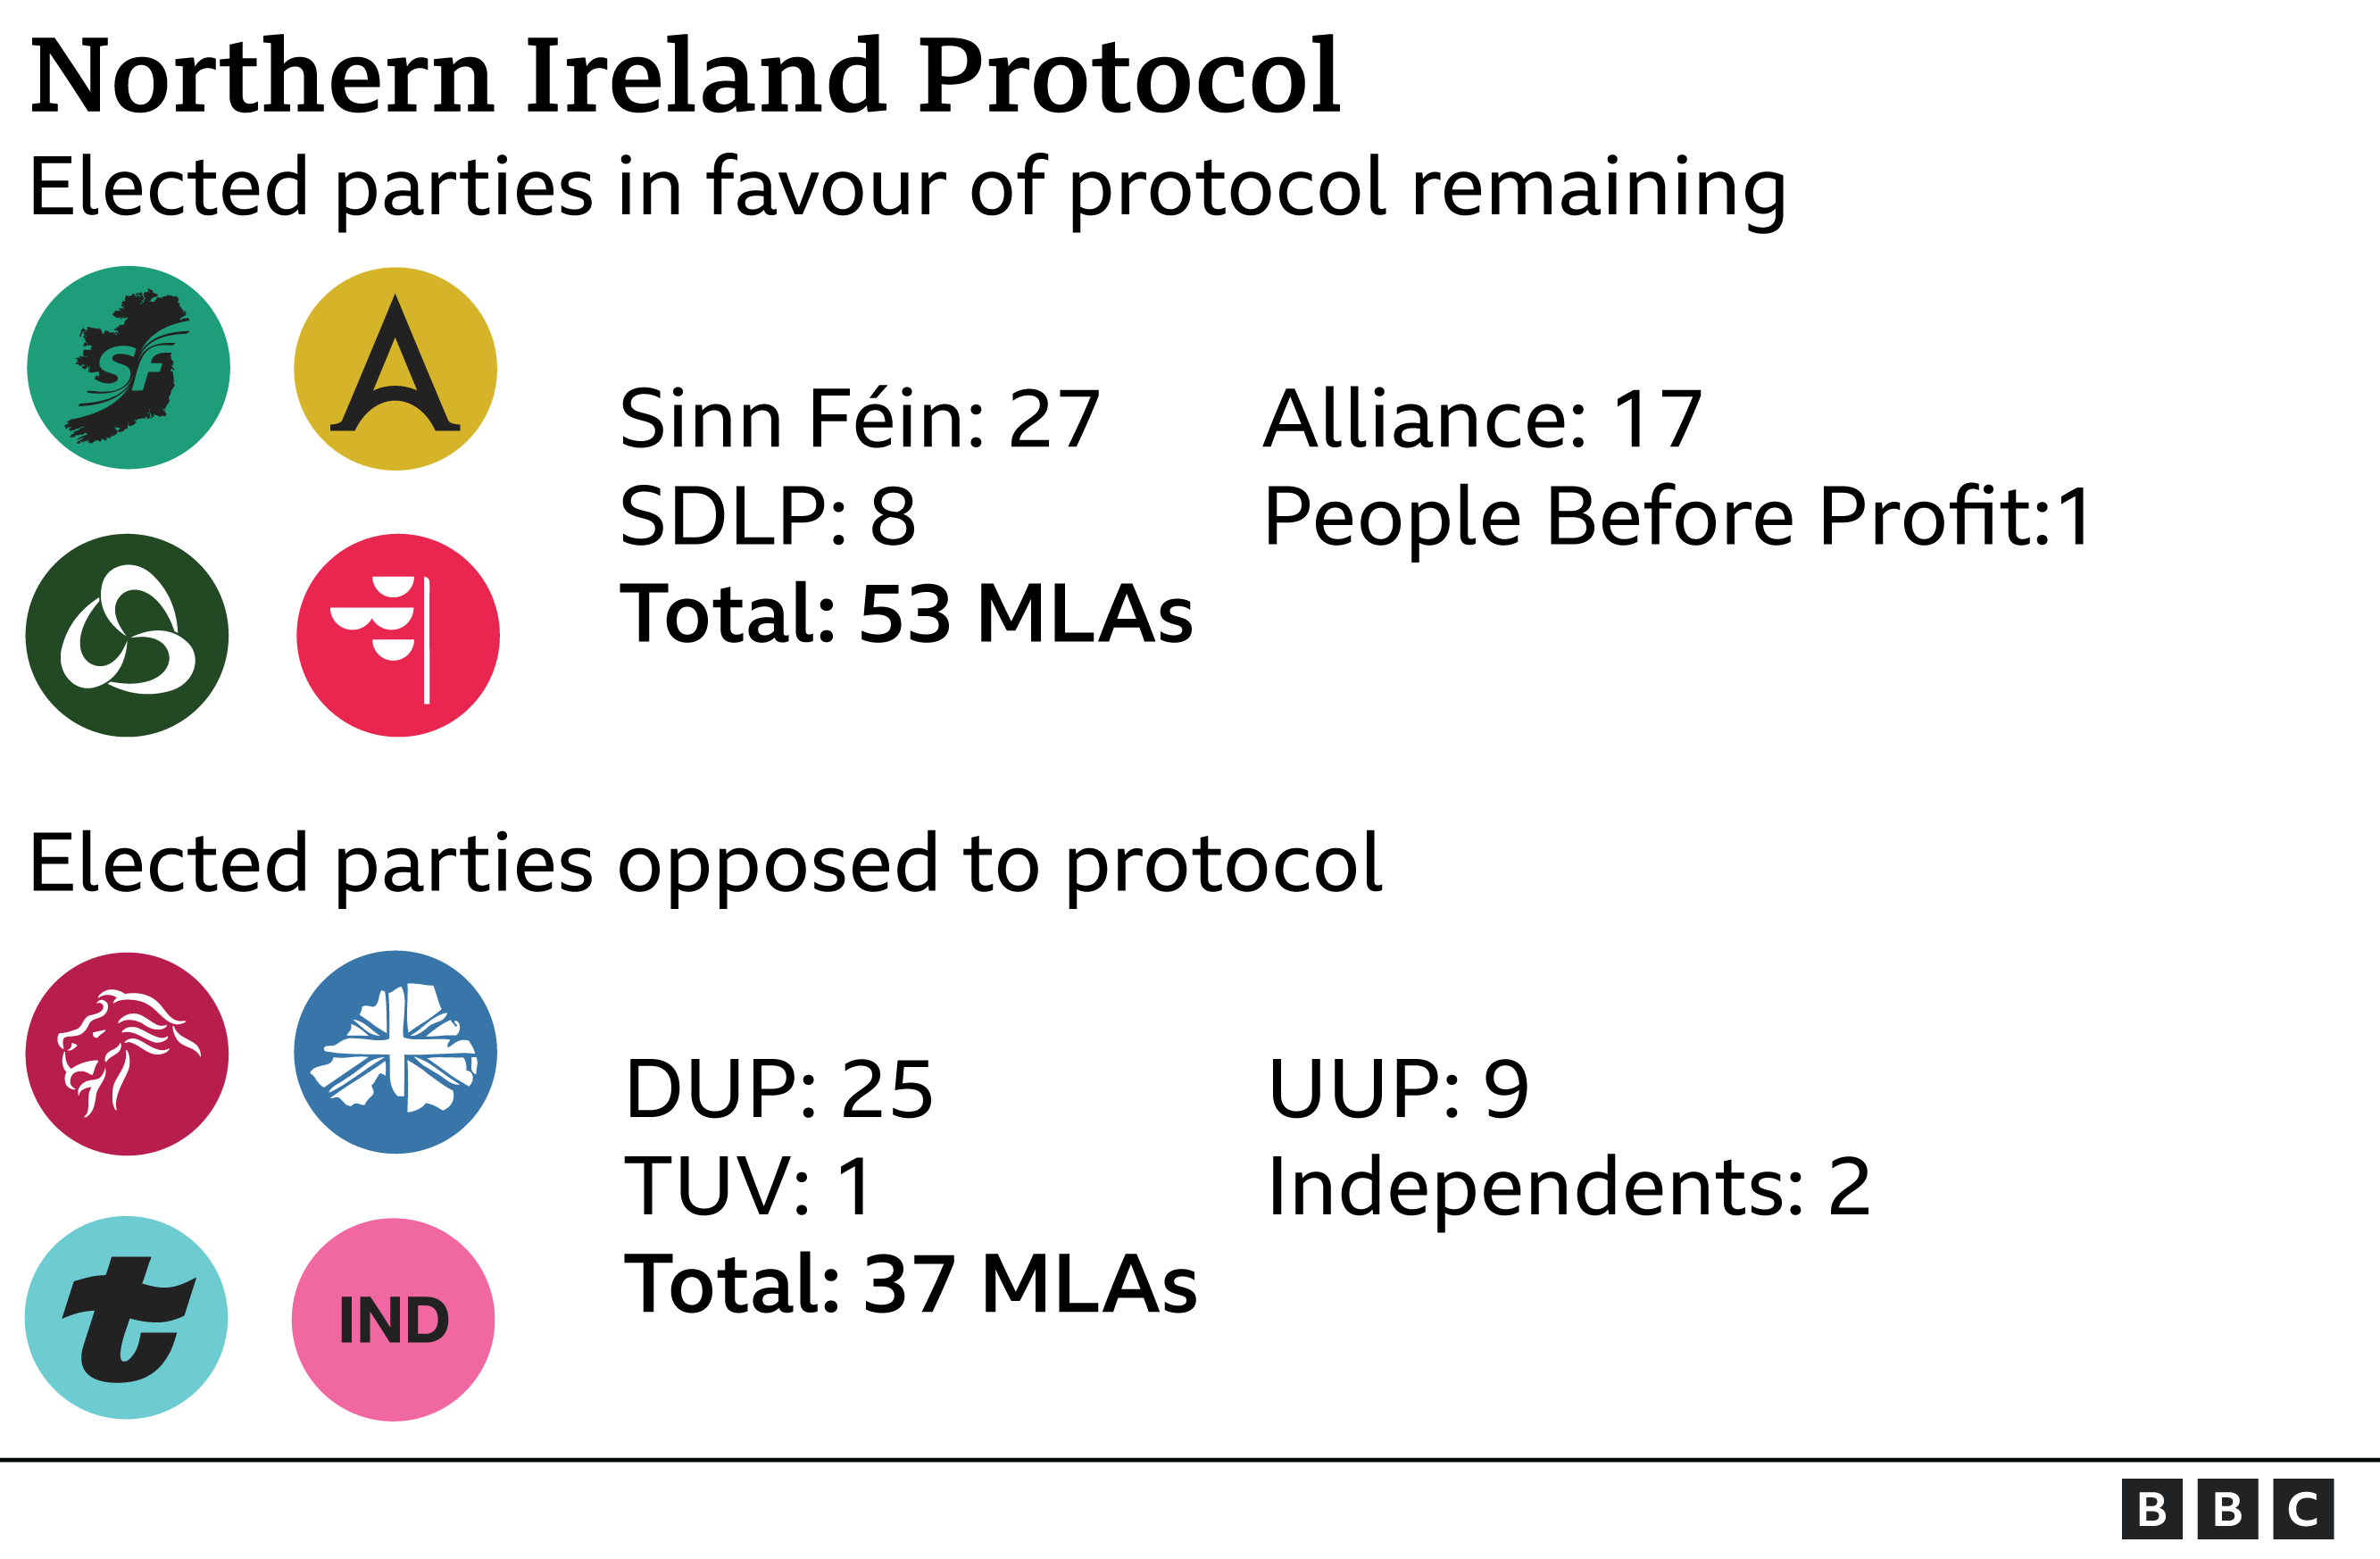 Most parties in the Northern Ireland Assembly want the protocol to remain